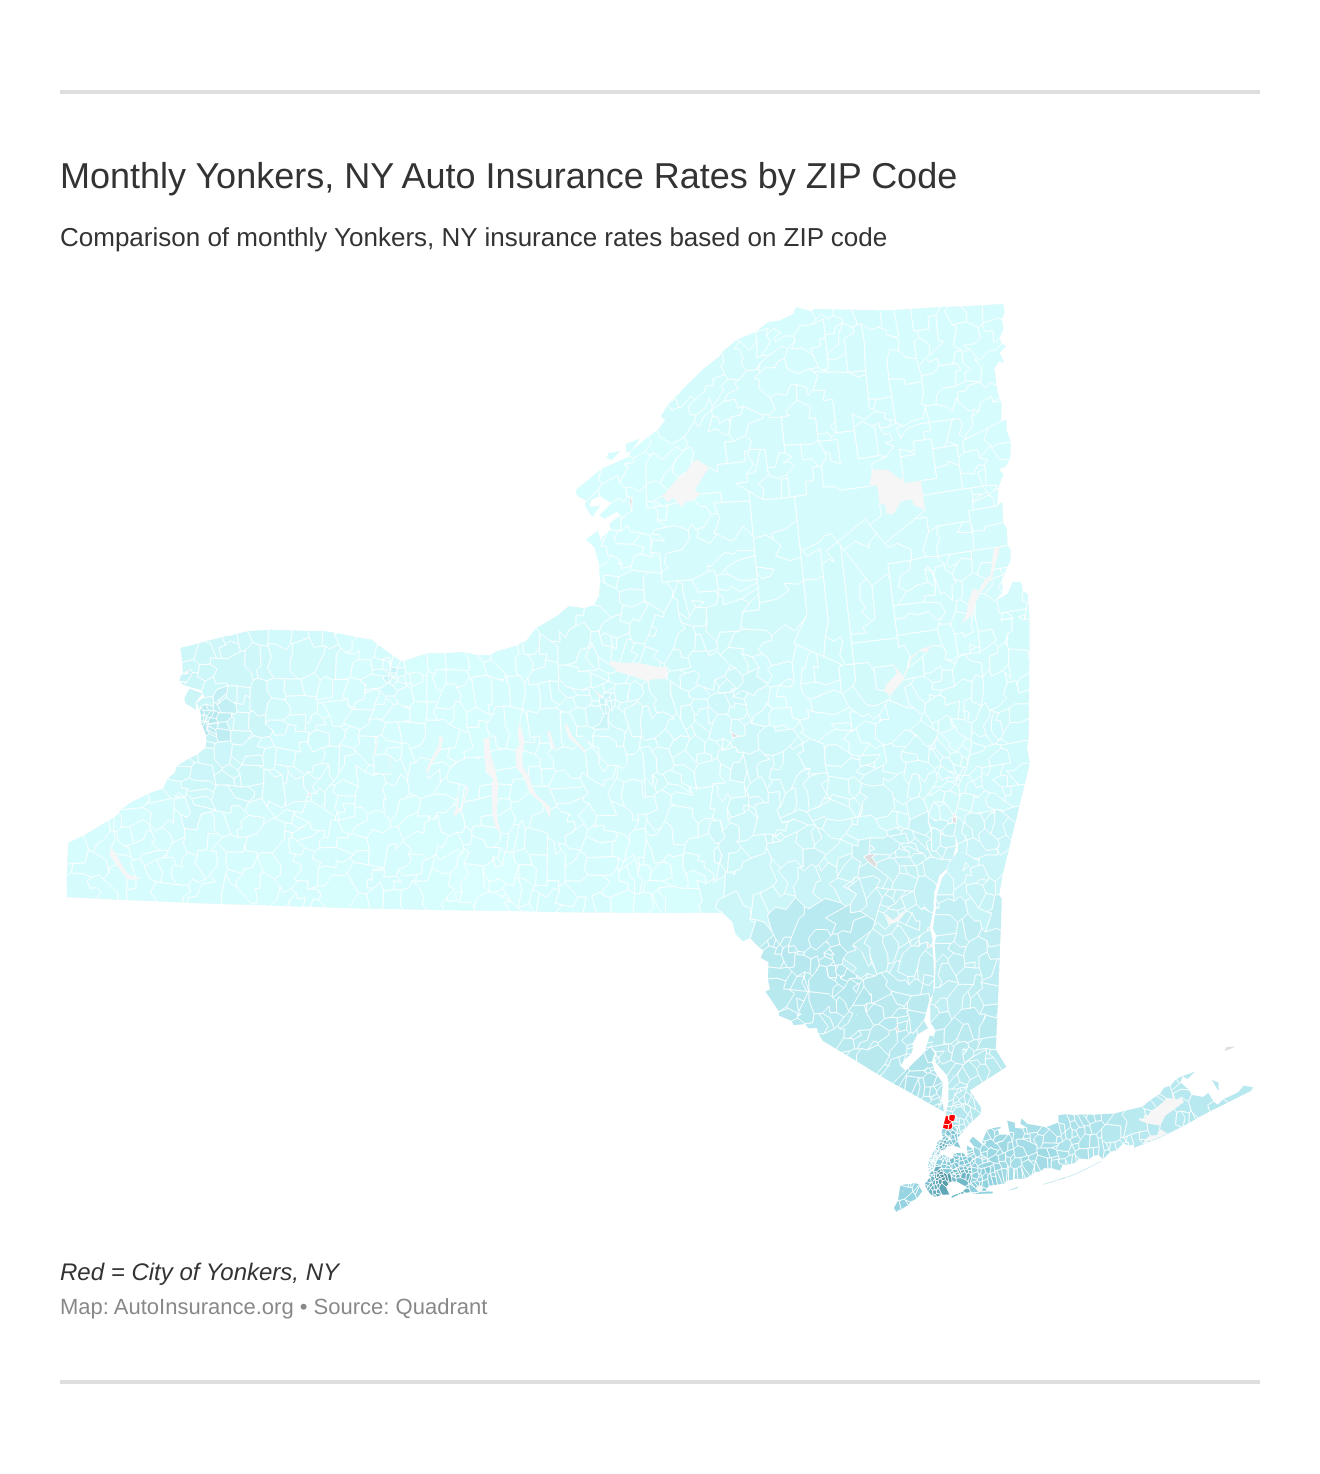 Monthly Yonkers, NY Auto Insurance Rates by ZIP Code